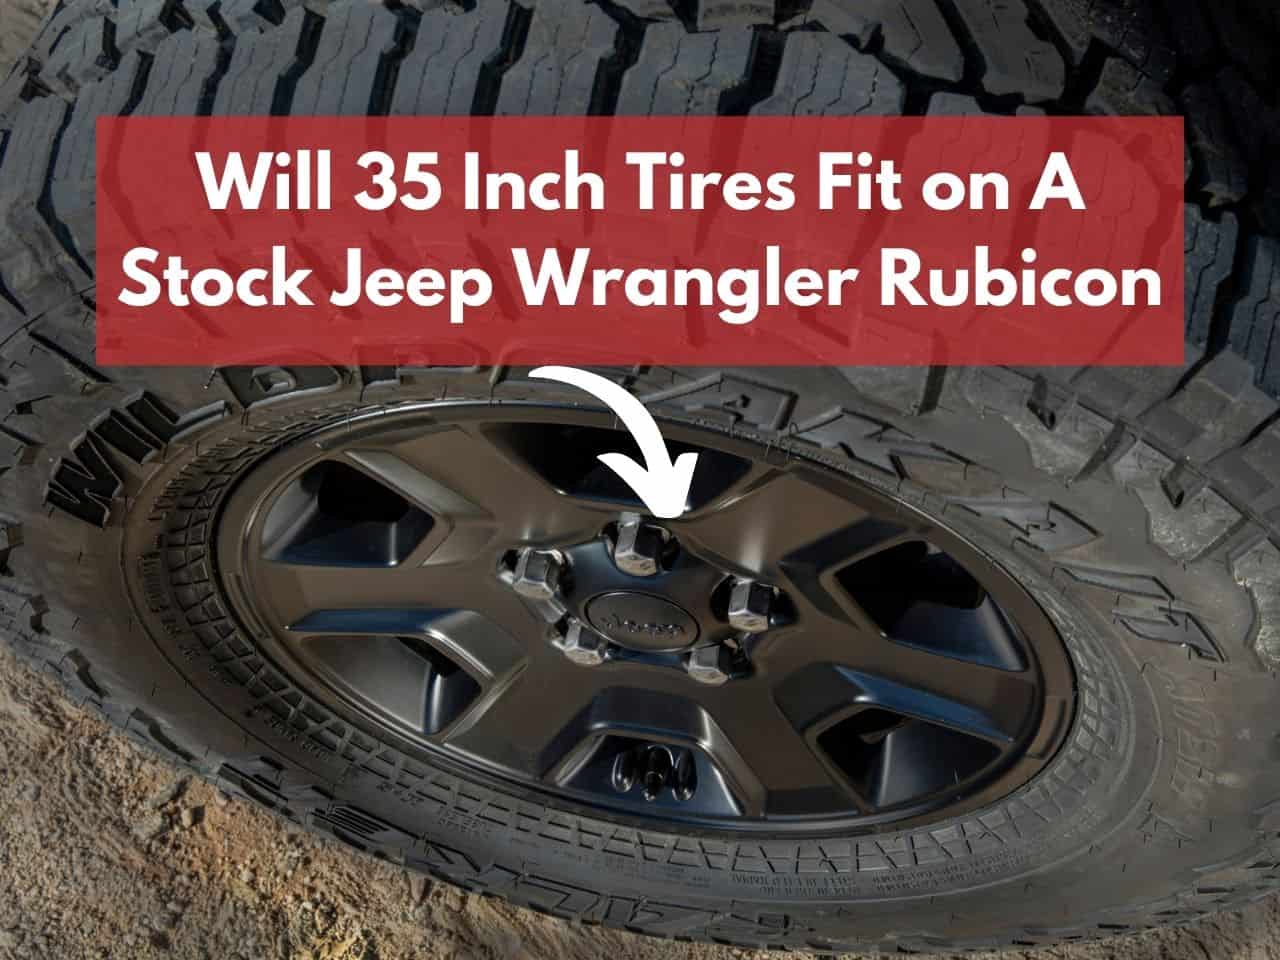 Will 35 Inch Tires Fit on A Stock Jeep Wrangler Rubicon